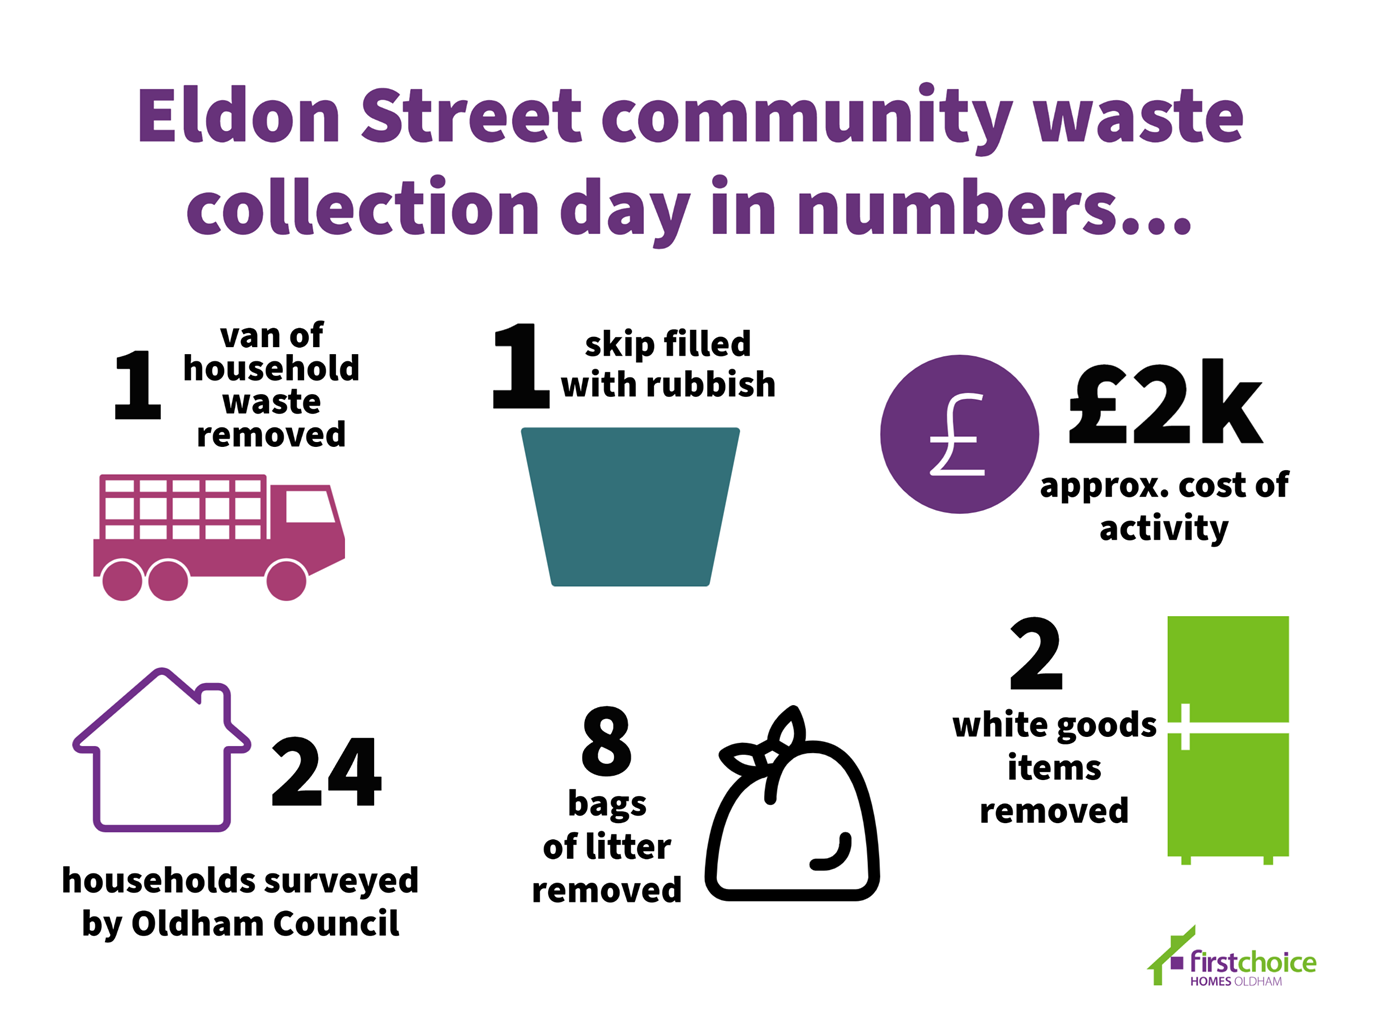 Eldon street community waste collection day - figures of what we achieved